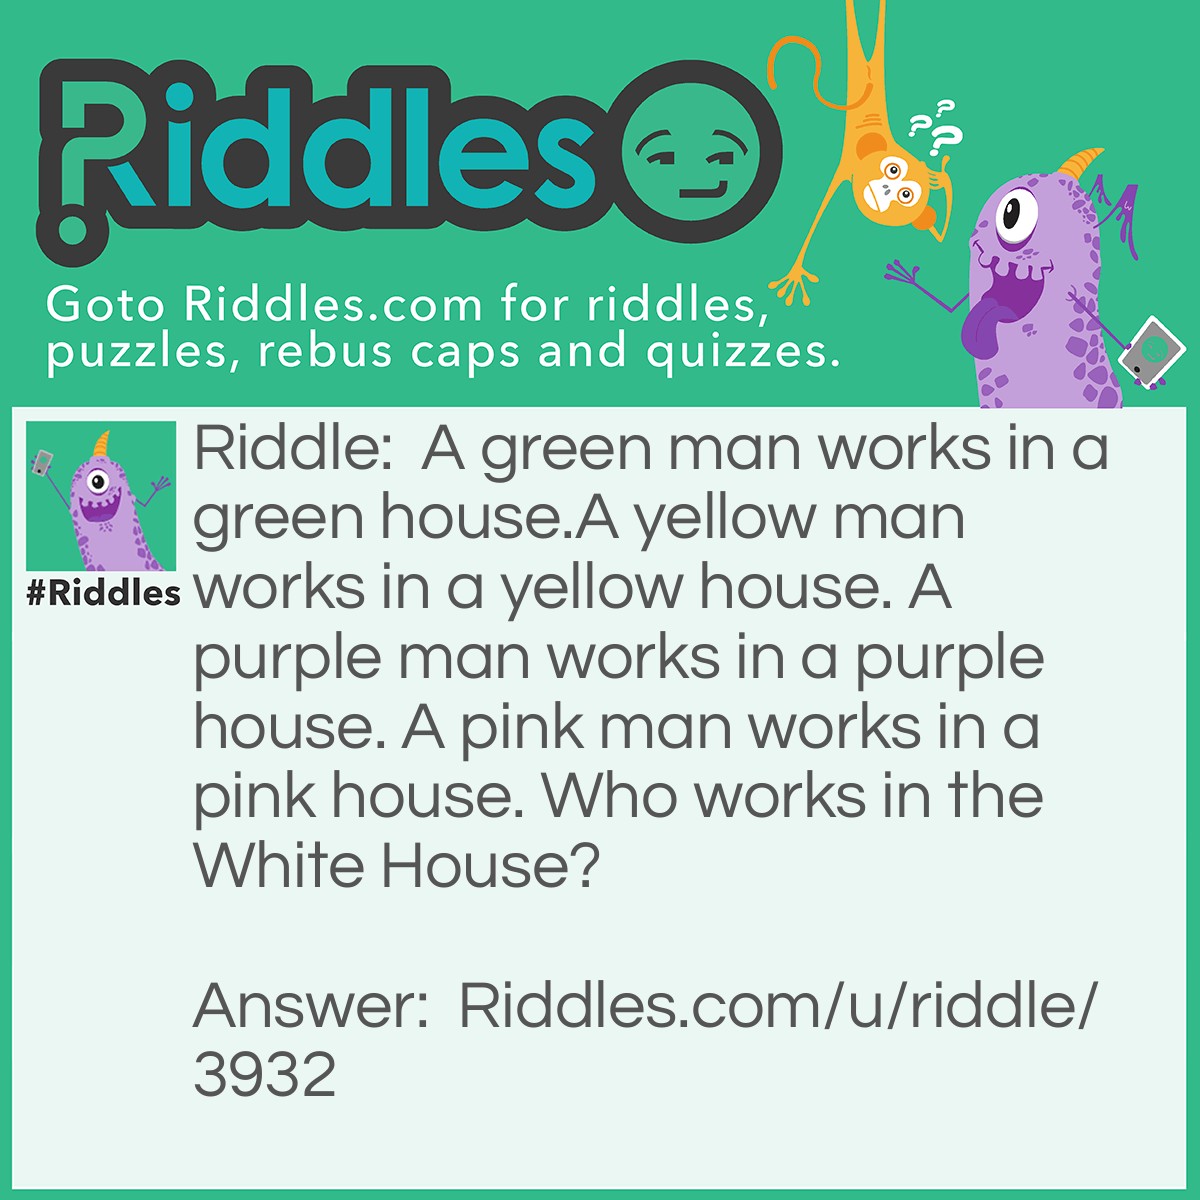 Riddle: A green man works in a green house.A yellow man works in a yellow house. A purple man works in a purple house. A pink man works in a pink house. Who works in the White House? Answer: The president of course!